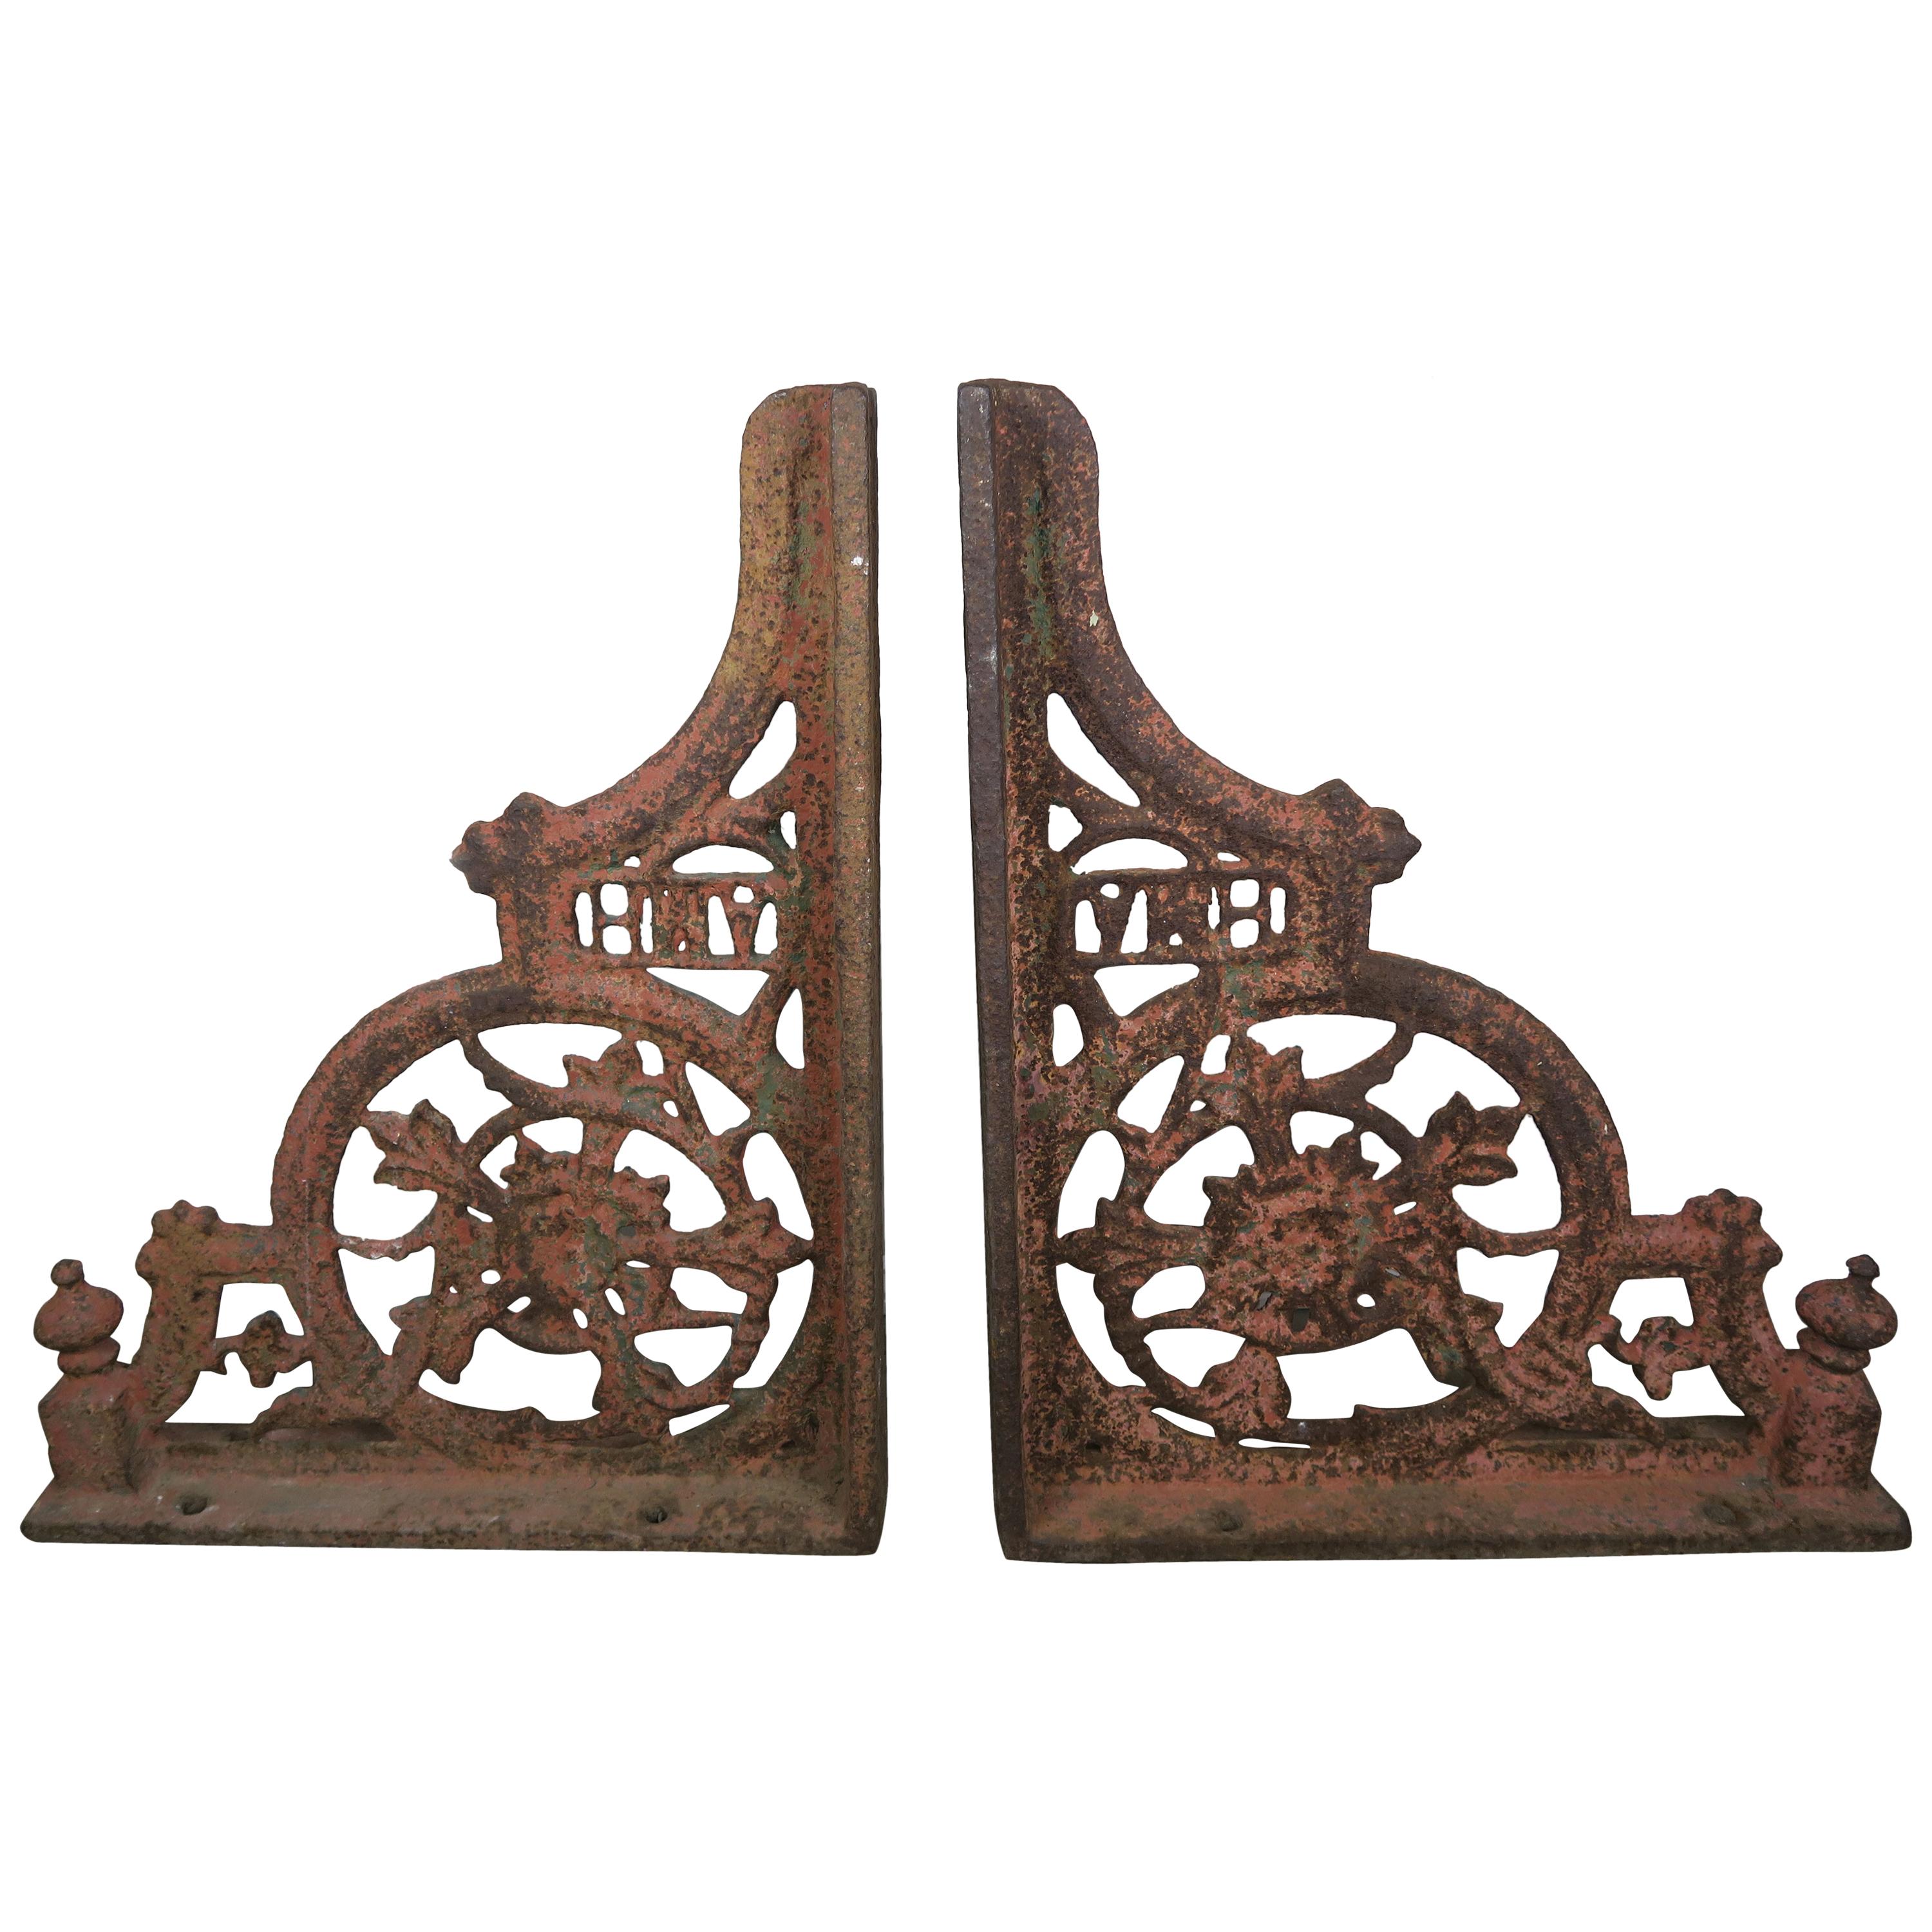 Pair of 19th Century American Painted Cast Iron Architectural Brackets "AMH"